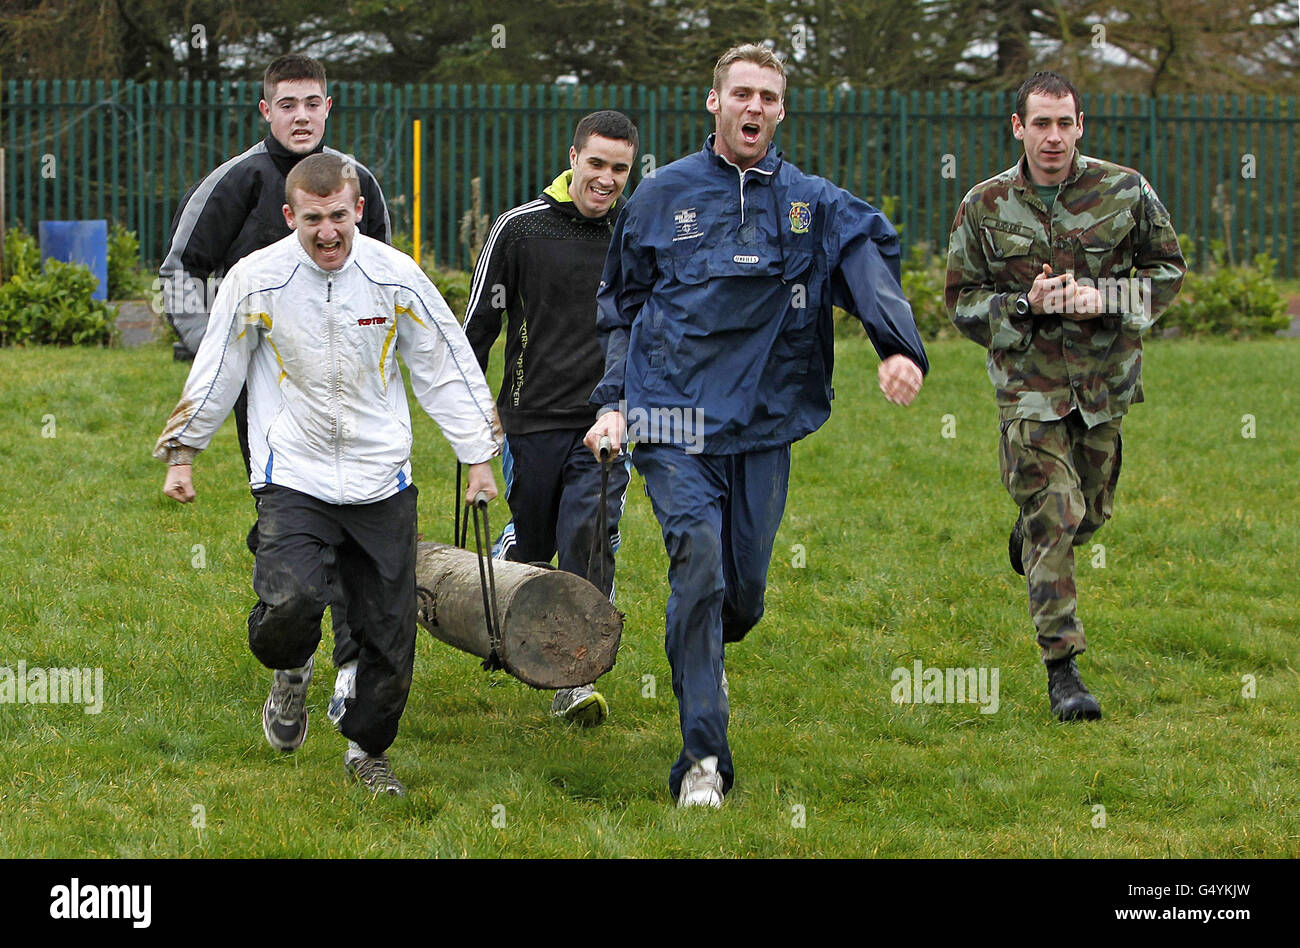 Irish Boxing Team members including Paddy Barnes (front left), Joe Ward (rear left), Roy Sheehan (front right) and David Oliver Joyce carry logs during the Irish Defence Forces endurance and team building assault course at the Curragh Army Camp, Curragh. Stock Photo